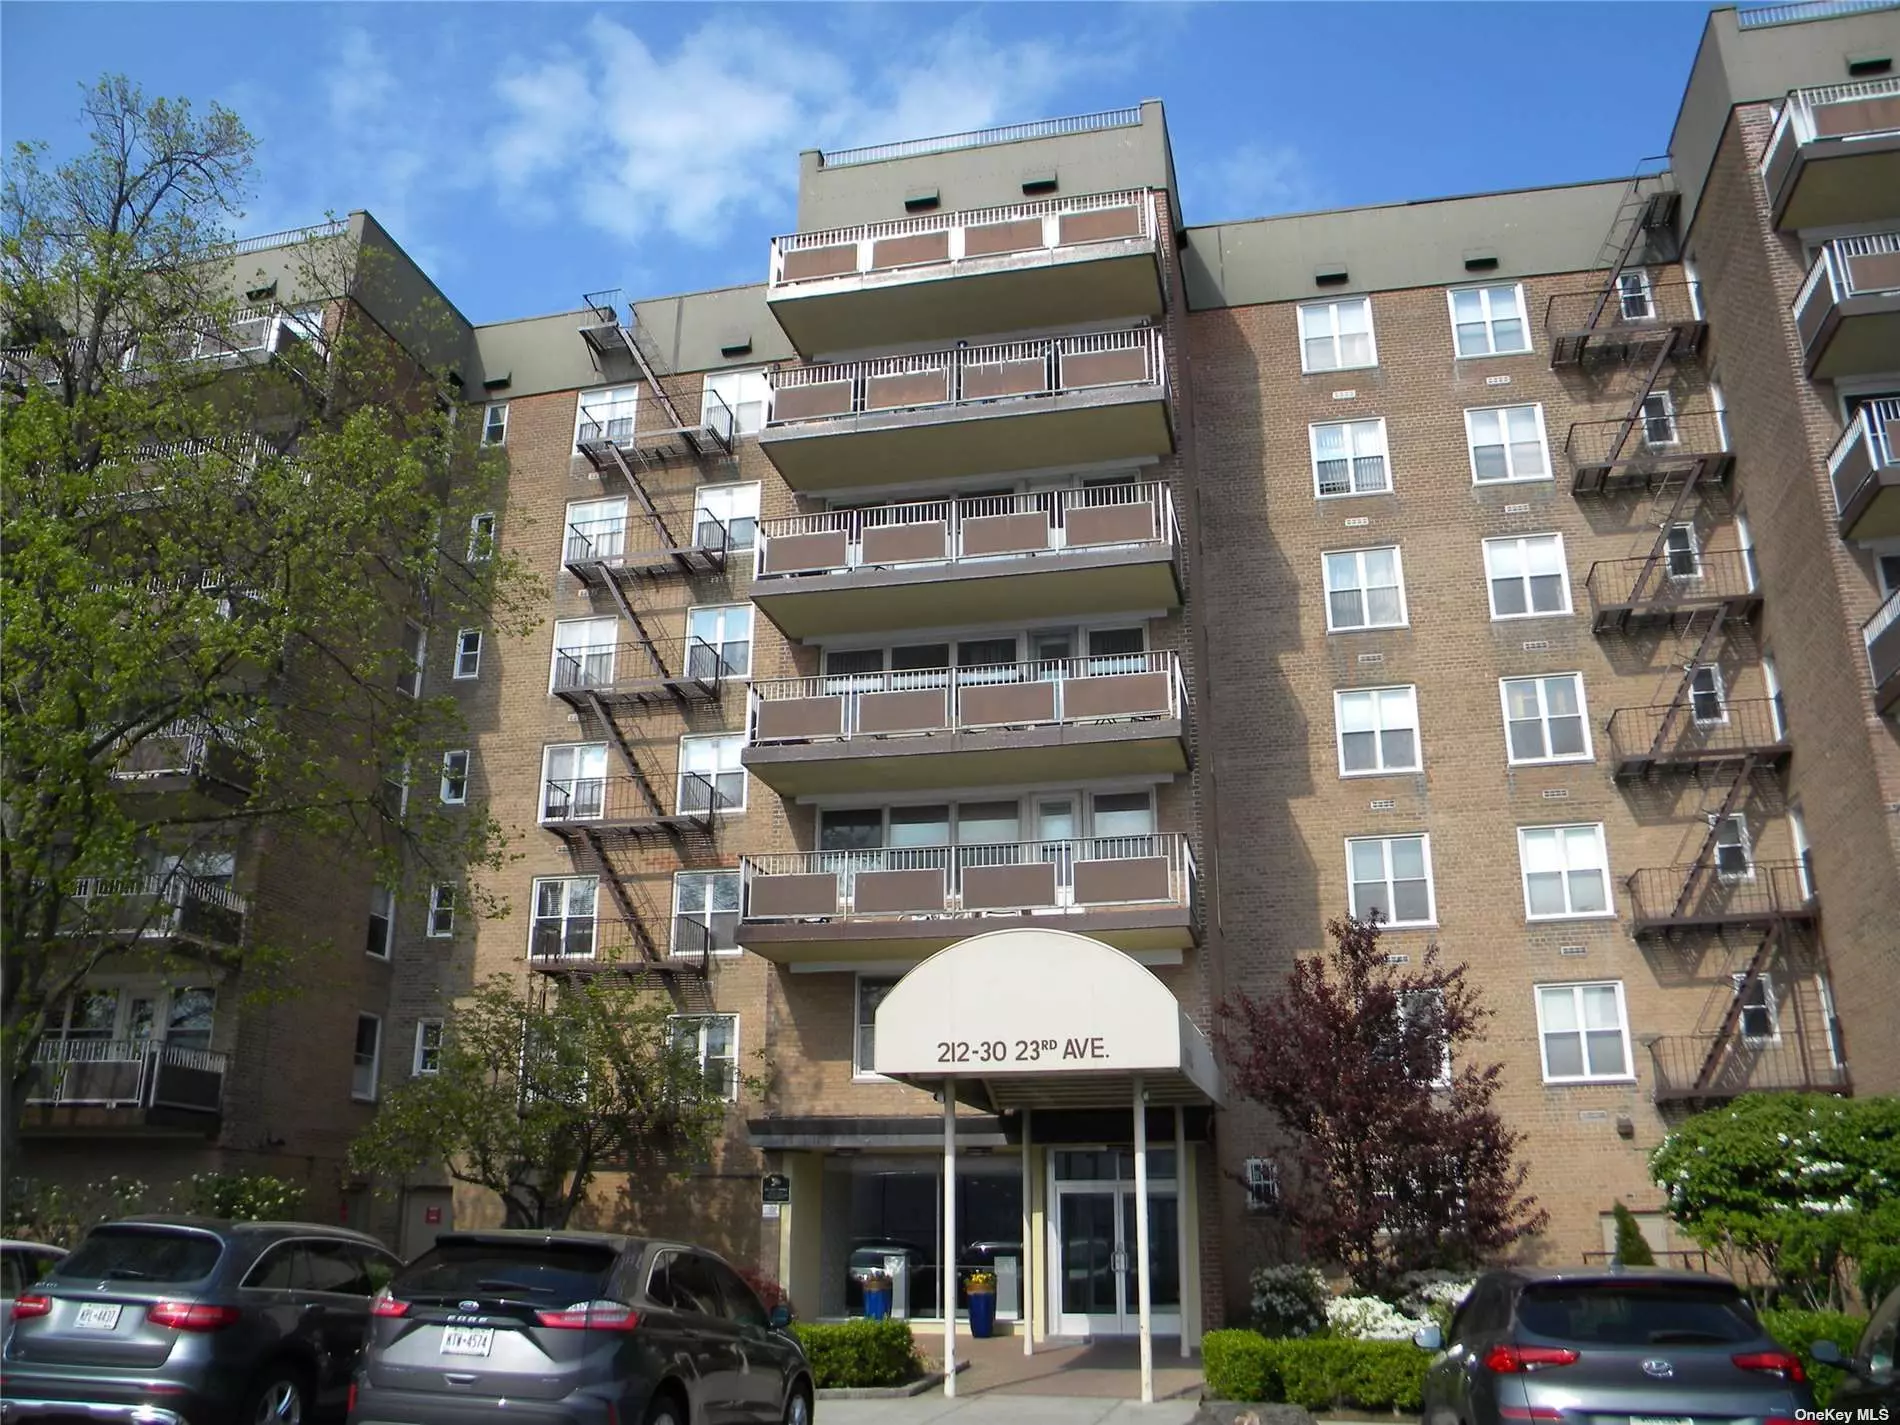 Sun filled 6th floor apt, spacious 2 bedroom corner unit. Spacious rooms throughout . Large Patio off Living room with plenty of views. Parking- waiting list. Outside parking is $46.72 Interior parking $73.40